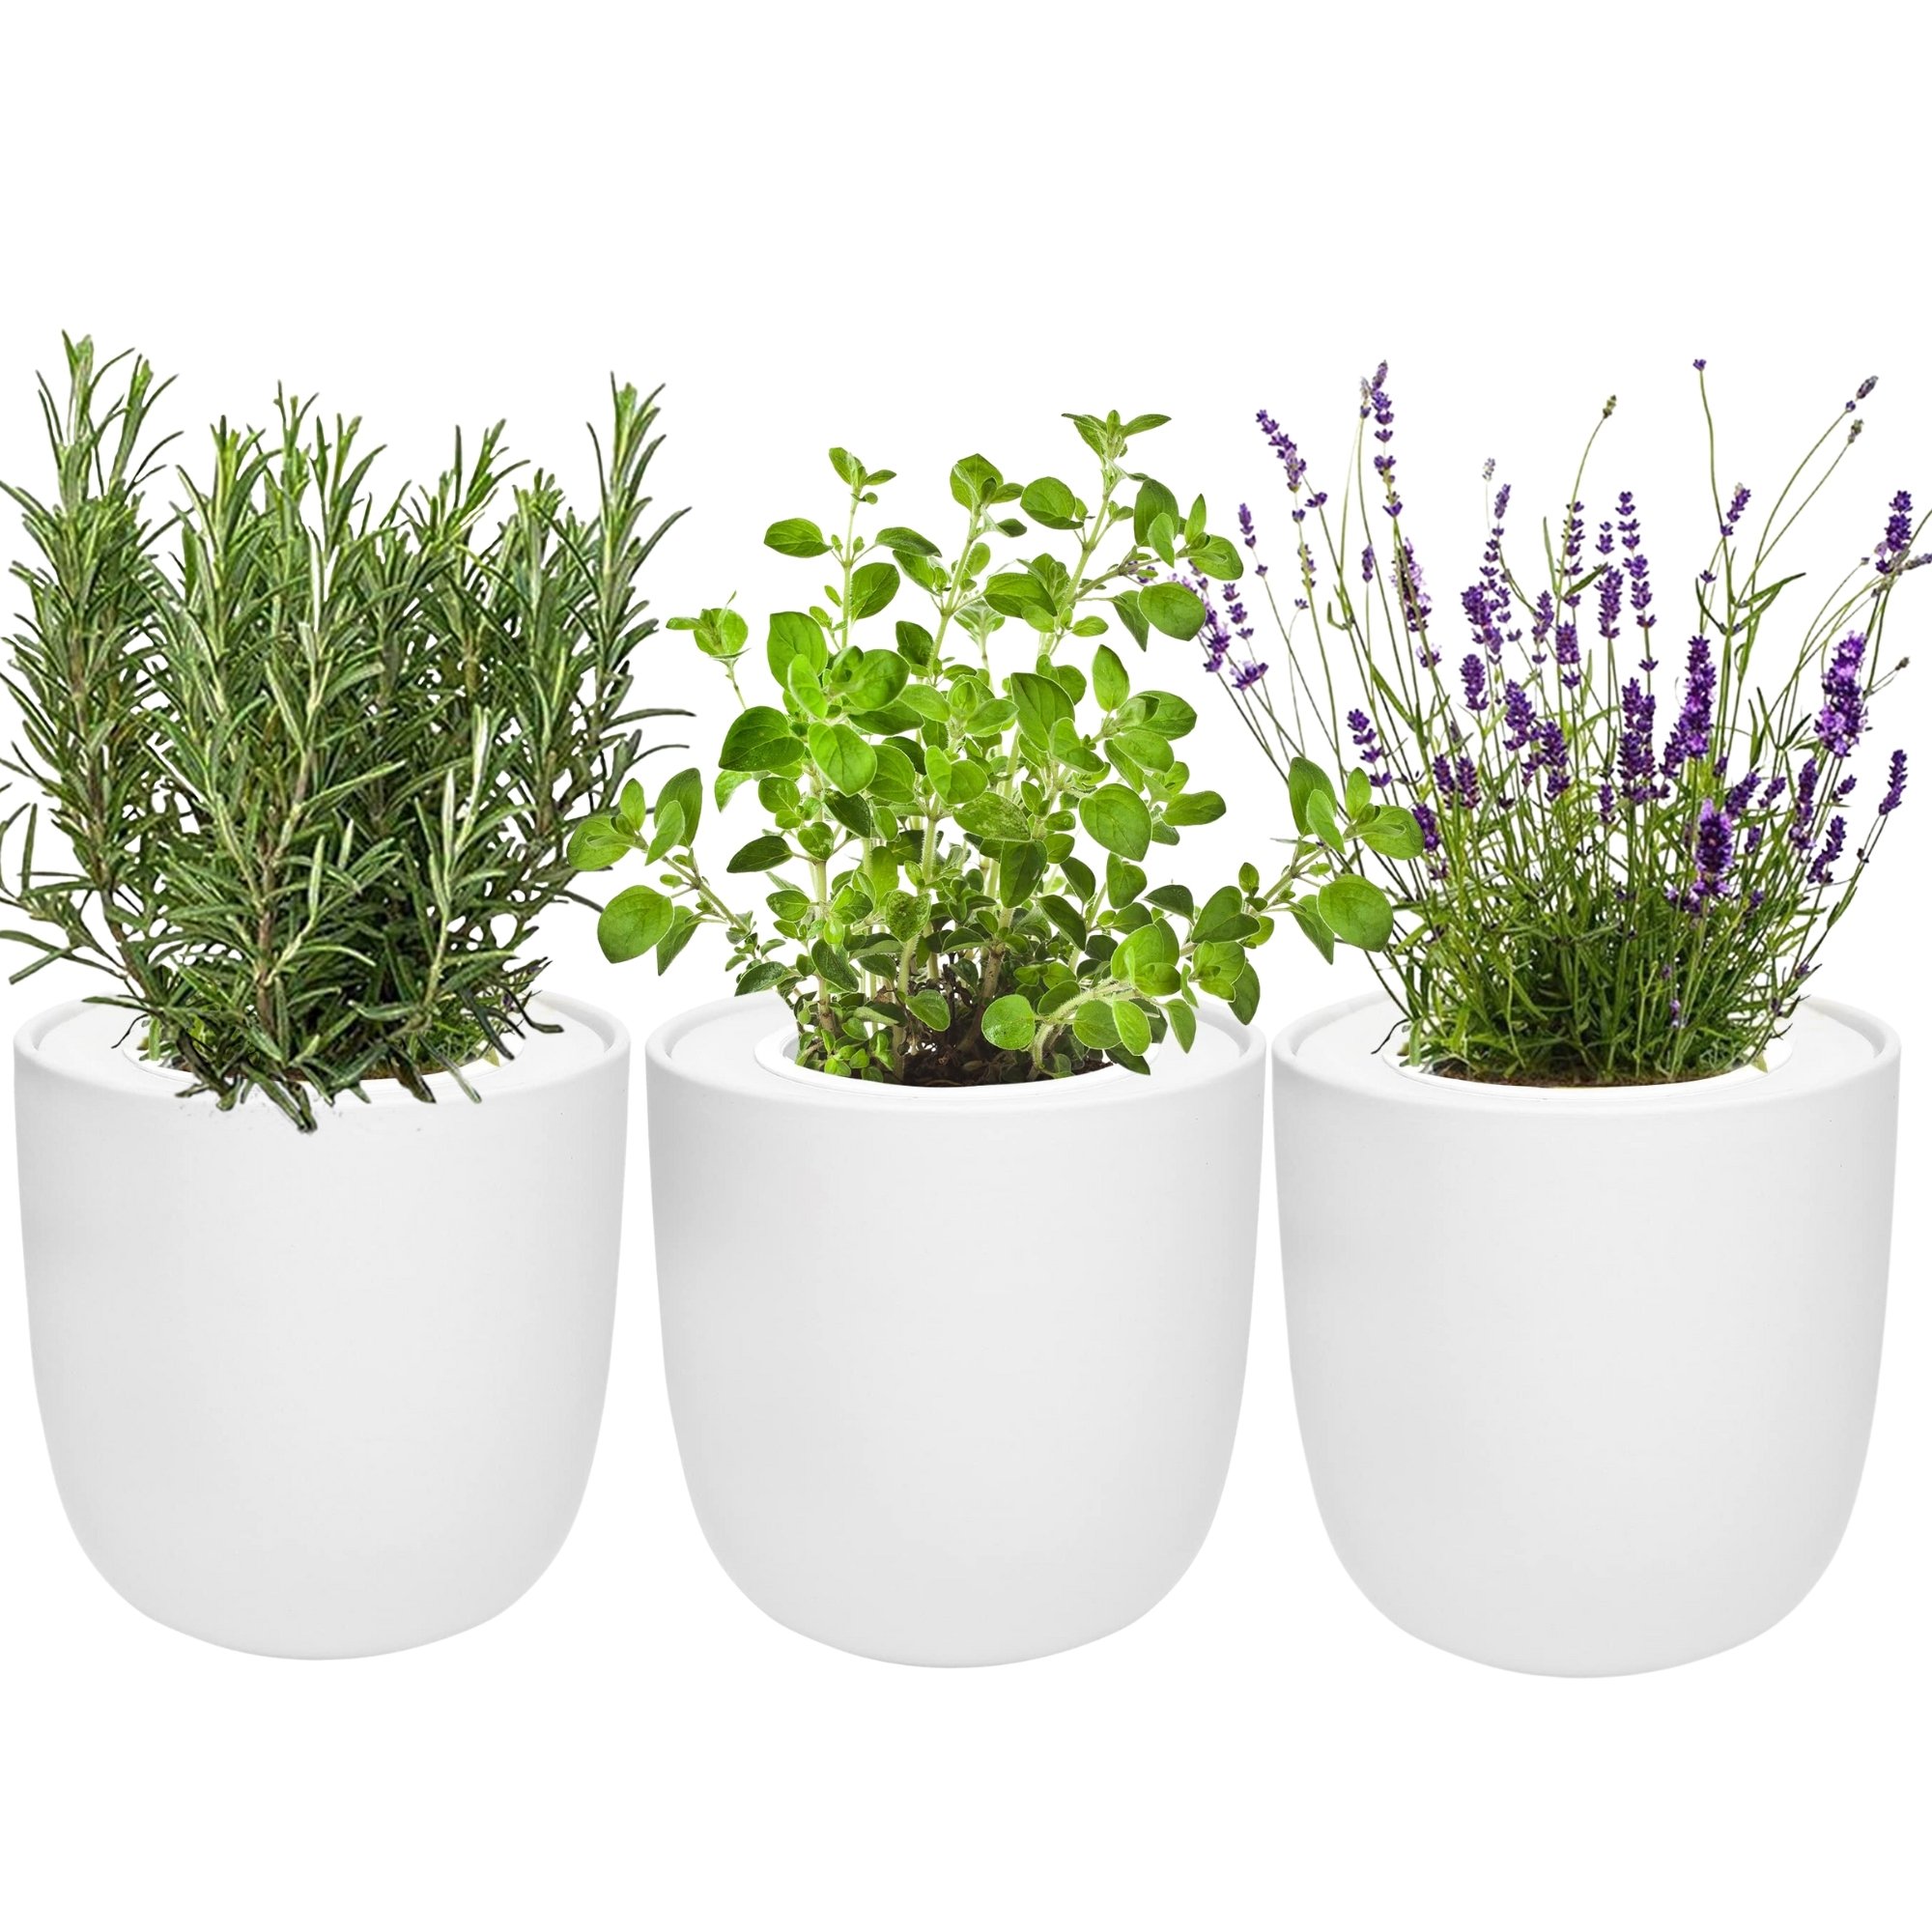 Hydroponic Herb Growing Trio Sets with White Ceramic Pot and Seeds (Rosemary, Lavender, Oregano)